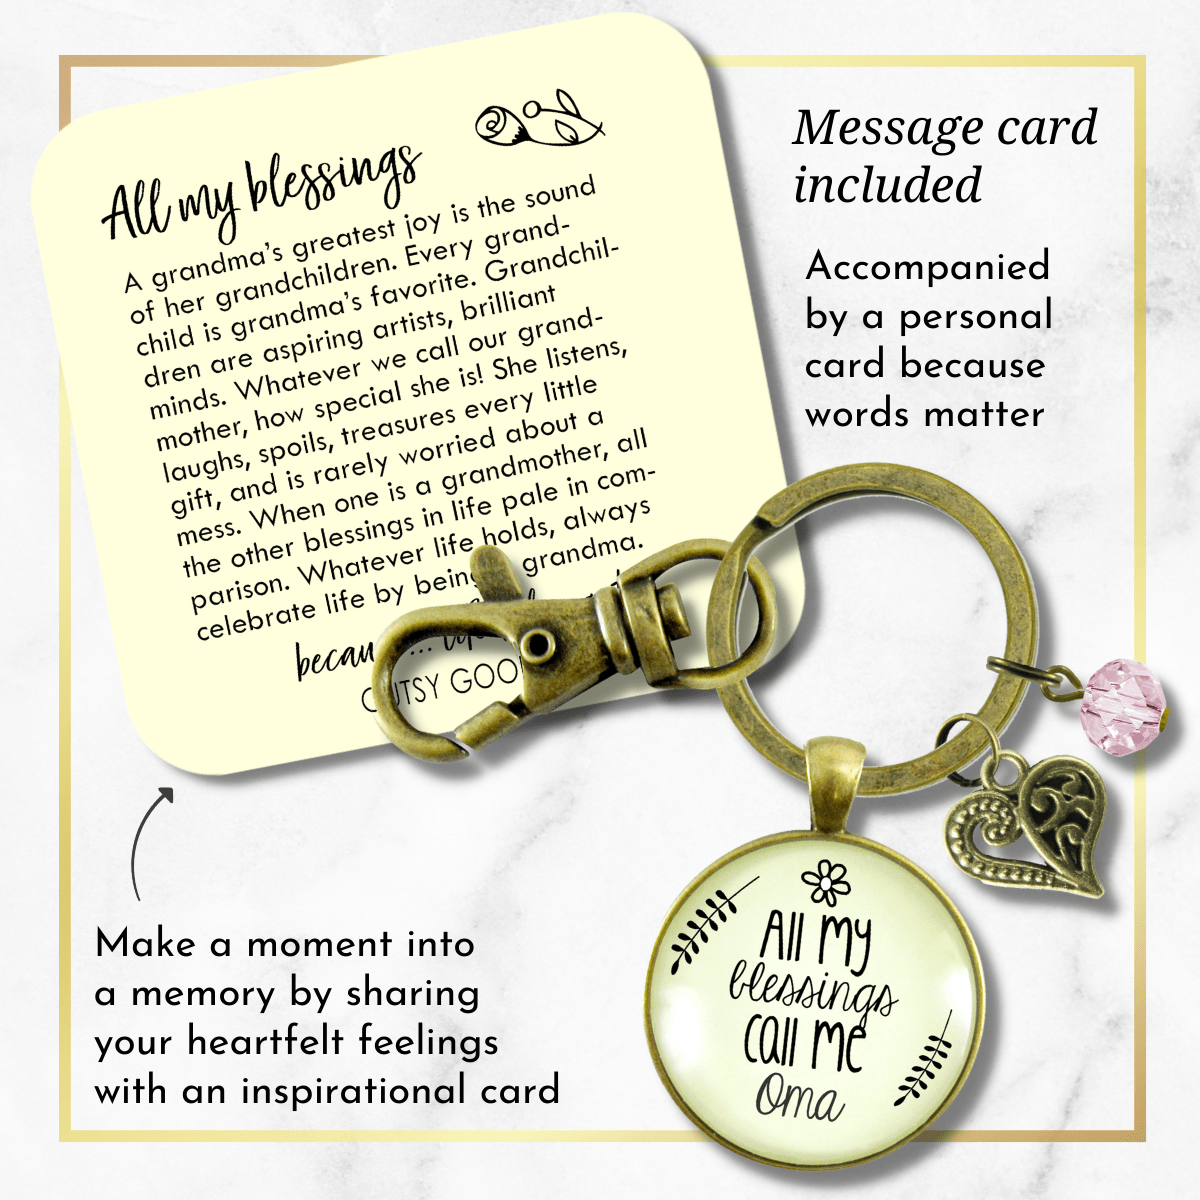 Oma Keychain All My Blessings German Grandma Womens Family Gift Jewelry - Gutsy Goodness Handmade Jewelry;Oma Keychain All My Blessings German Grandma Womens Family Gift Jewelry - Gutsy Goodness Handmade Jewelry Gifts